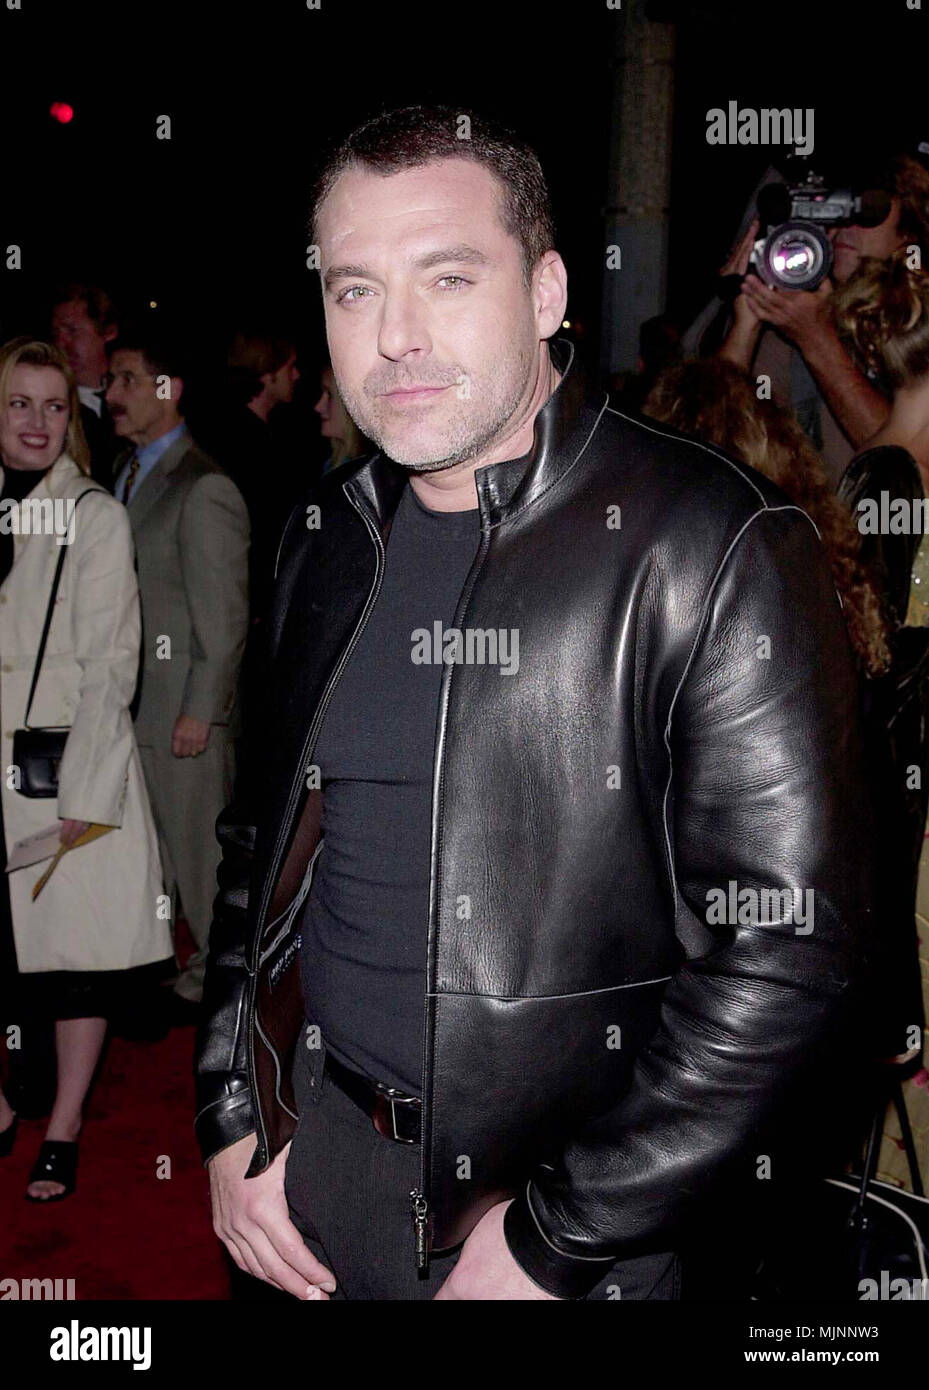 06 Nov 2000, Los Angeles, California, USA --- Original caption: Red Planet premiere was held at the Westwood Village Theatre in Los Angeles. --- ' Tsuni / USA 'Tom Sizemore  327 Tom Sizemore  327 Celebrities fashion / Three Quarters from the Red Carpet-1994-2000, one person, Vertical, Best of, Hollywood Life, Event in Hollywood Life - California,  Red Carpet Event, Vertical, USA, Film Industry, Celebrities,  Photography, Bestof, Arts Culture and Entertainment, , , Topix  Tom Sizemore  327 Event in Hollywood Life - California,  Red Carpet Event, Vertical, USA, Film Industry, Celebrities,  Photo Stock Photo